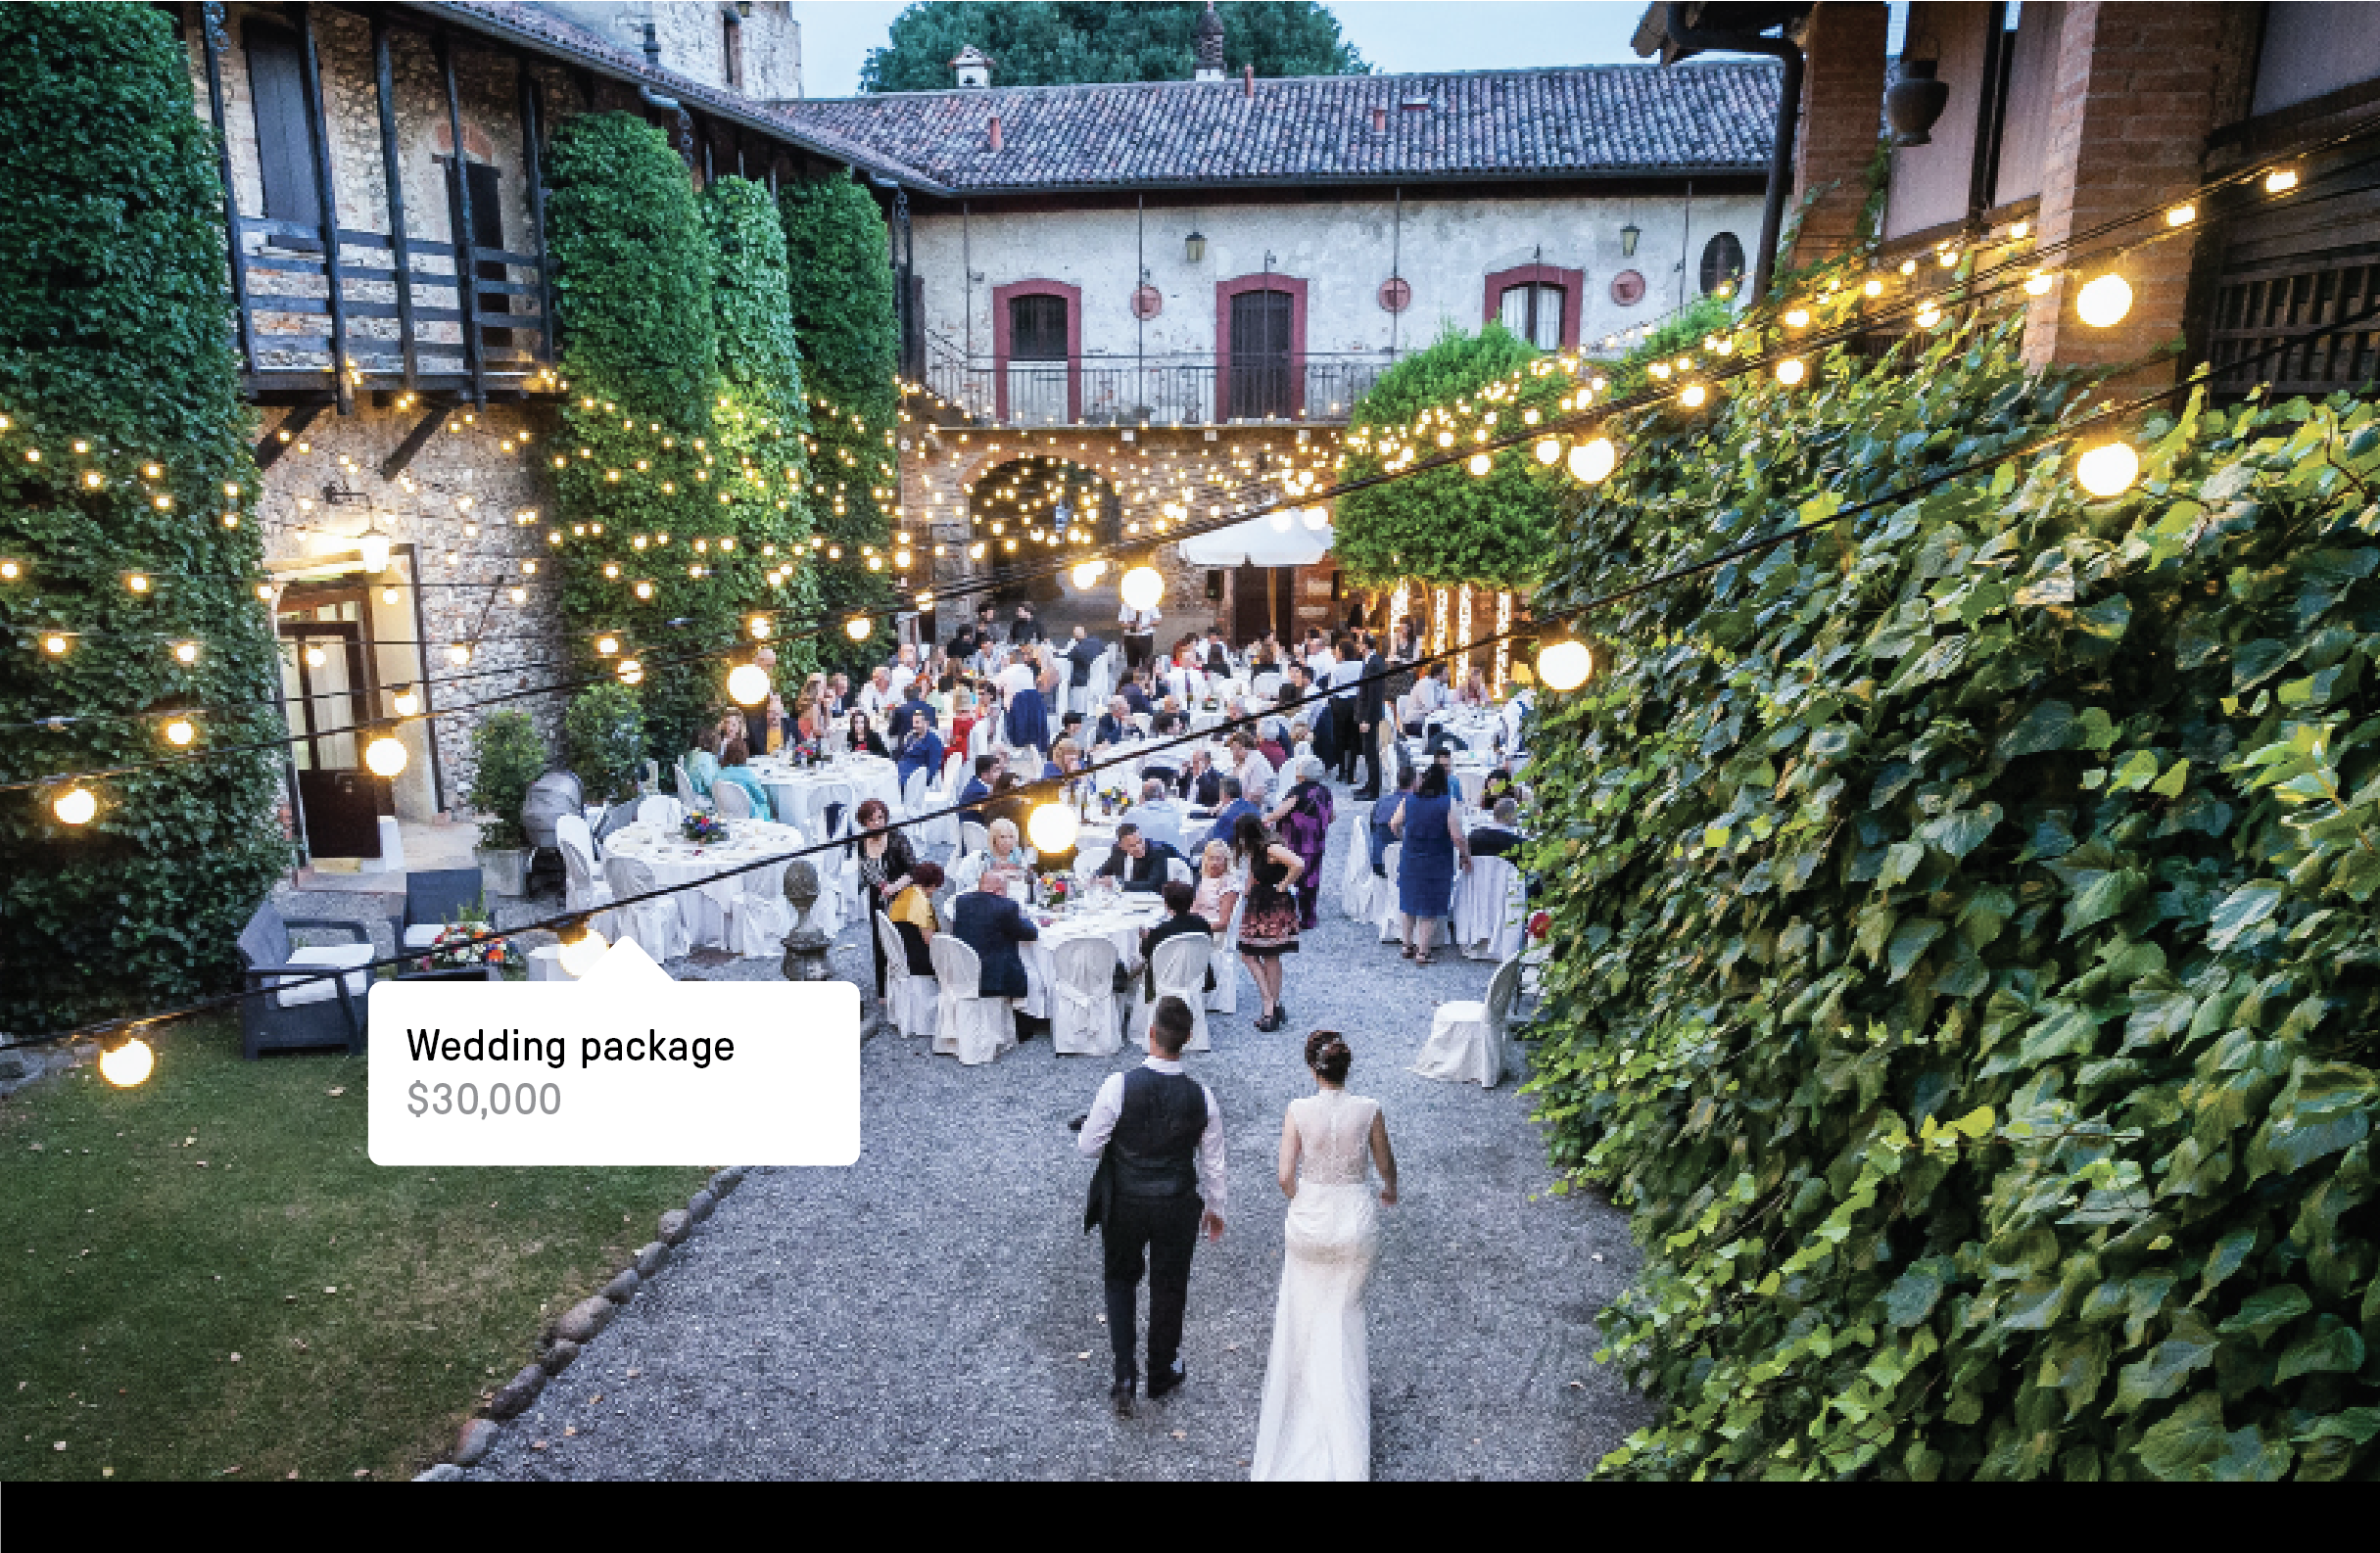 Image of an outdoor wedding